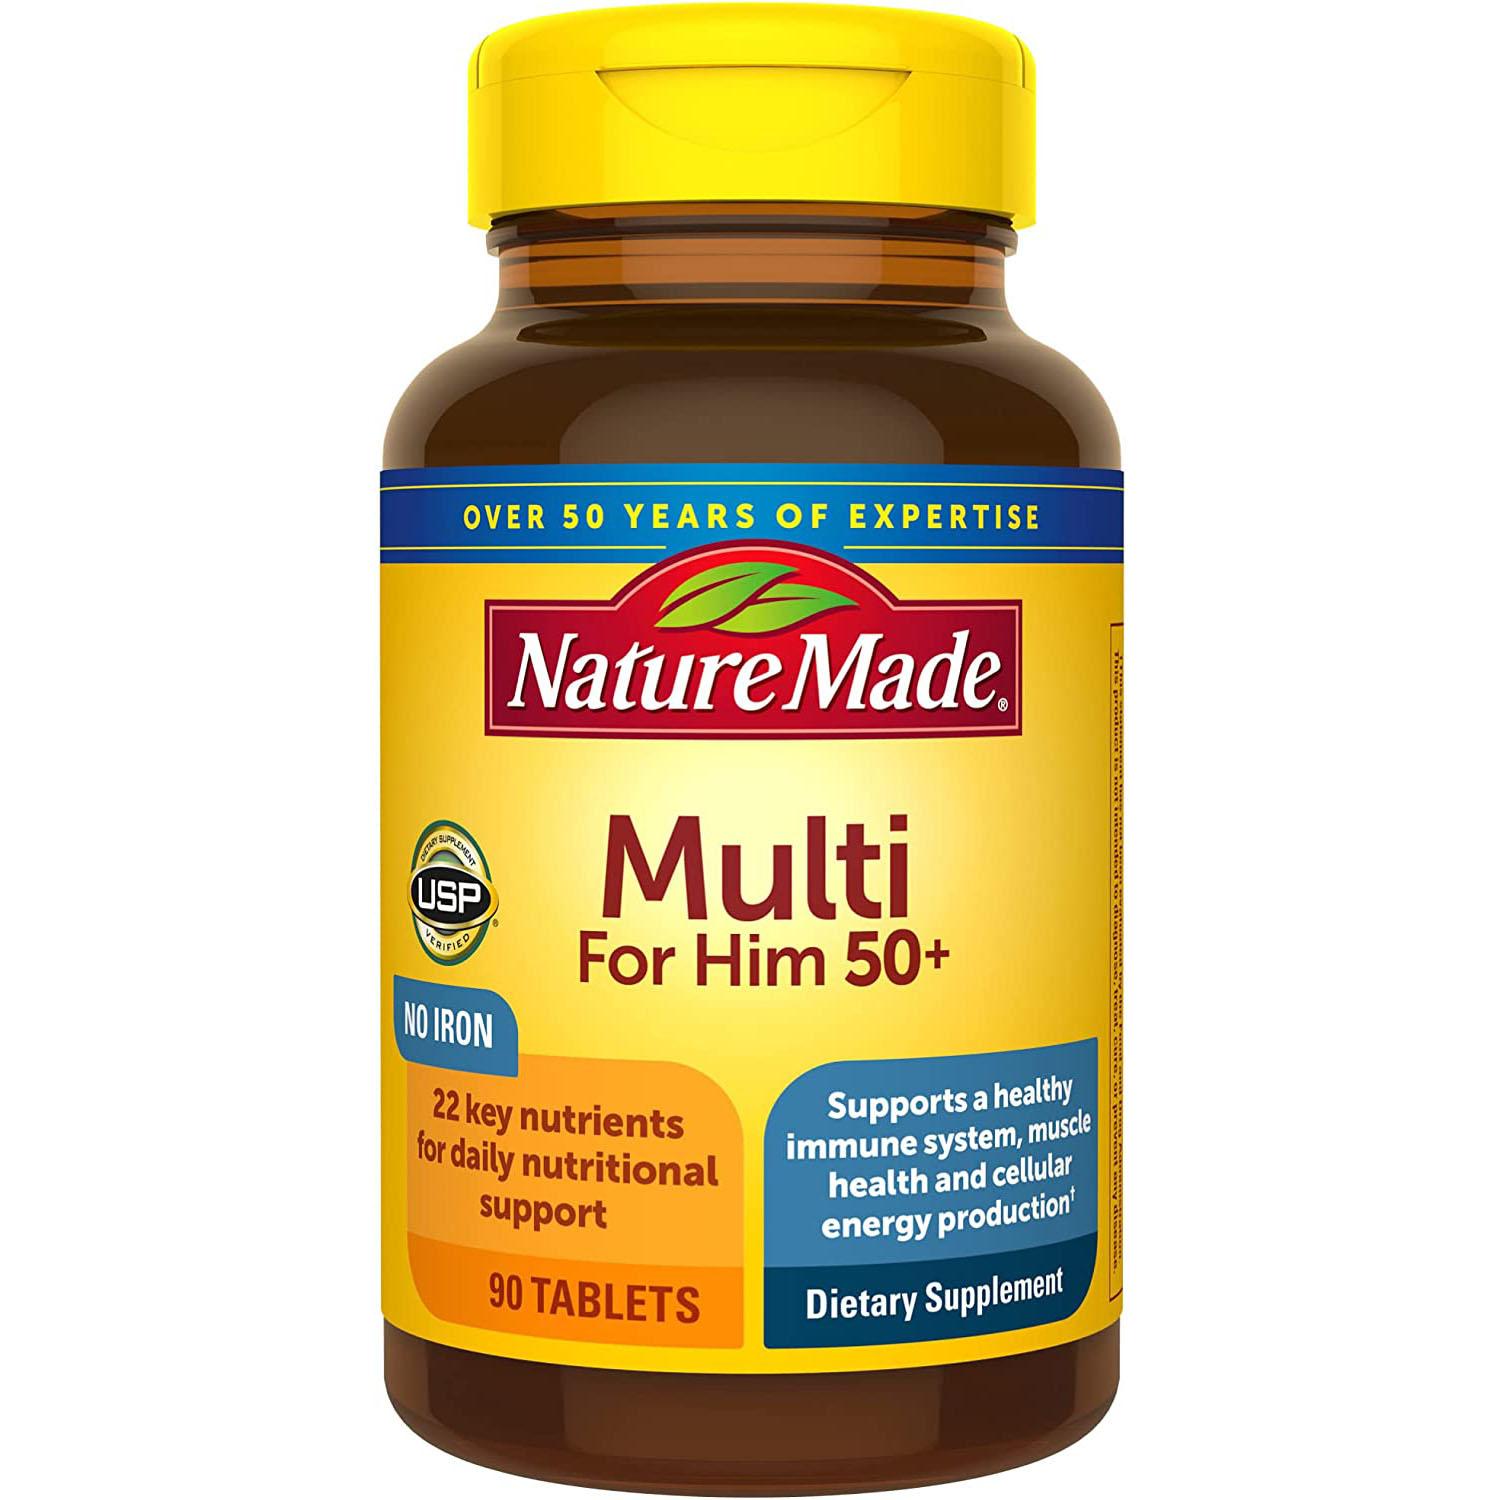 Nature Made Mens 50+ Multivitamin Tablets 180 Pack for $7.42 Shipped